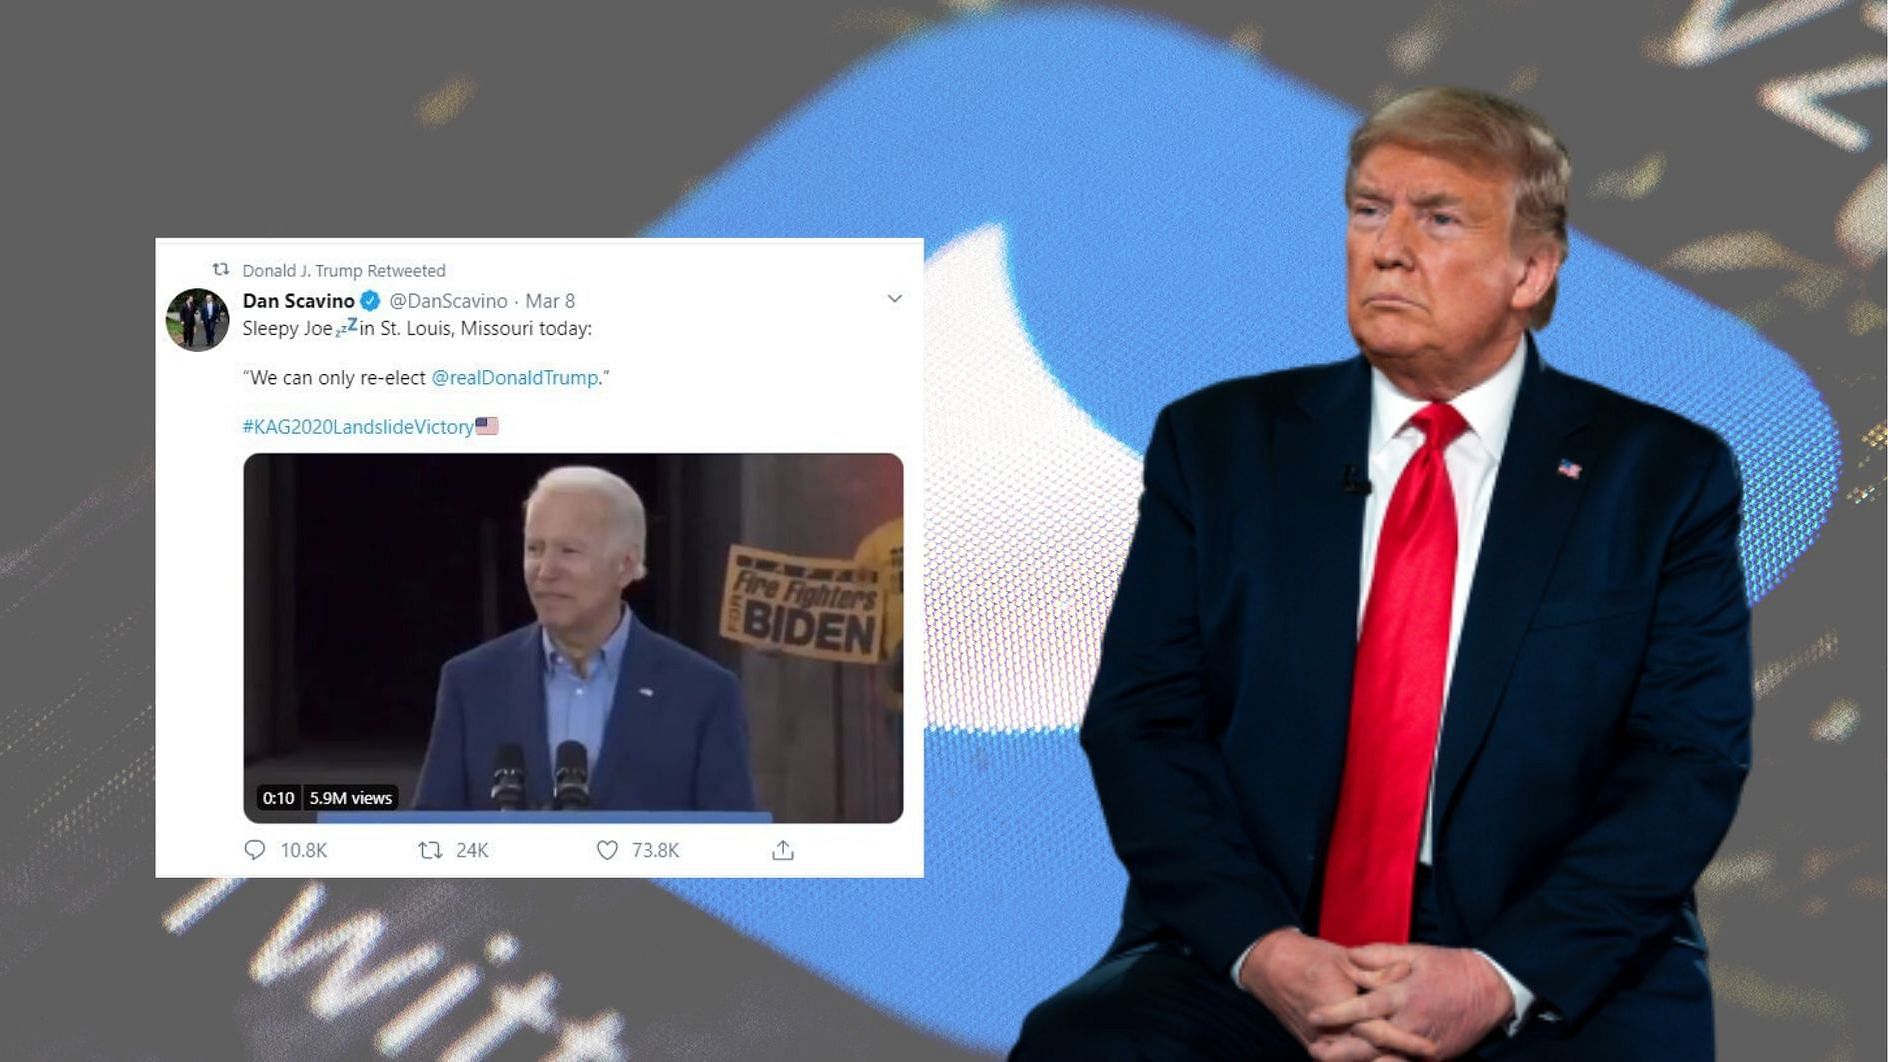 The video, a deceptive edit of former vice president Joe Biden was first shared by White House social media director Dan Scavino and subsequently retweeted by Donald Trump.